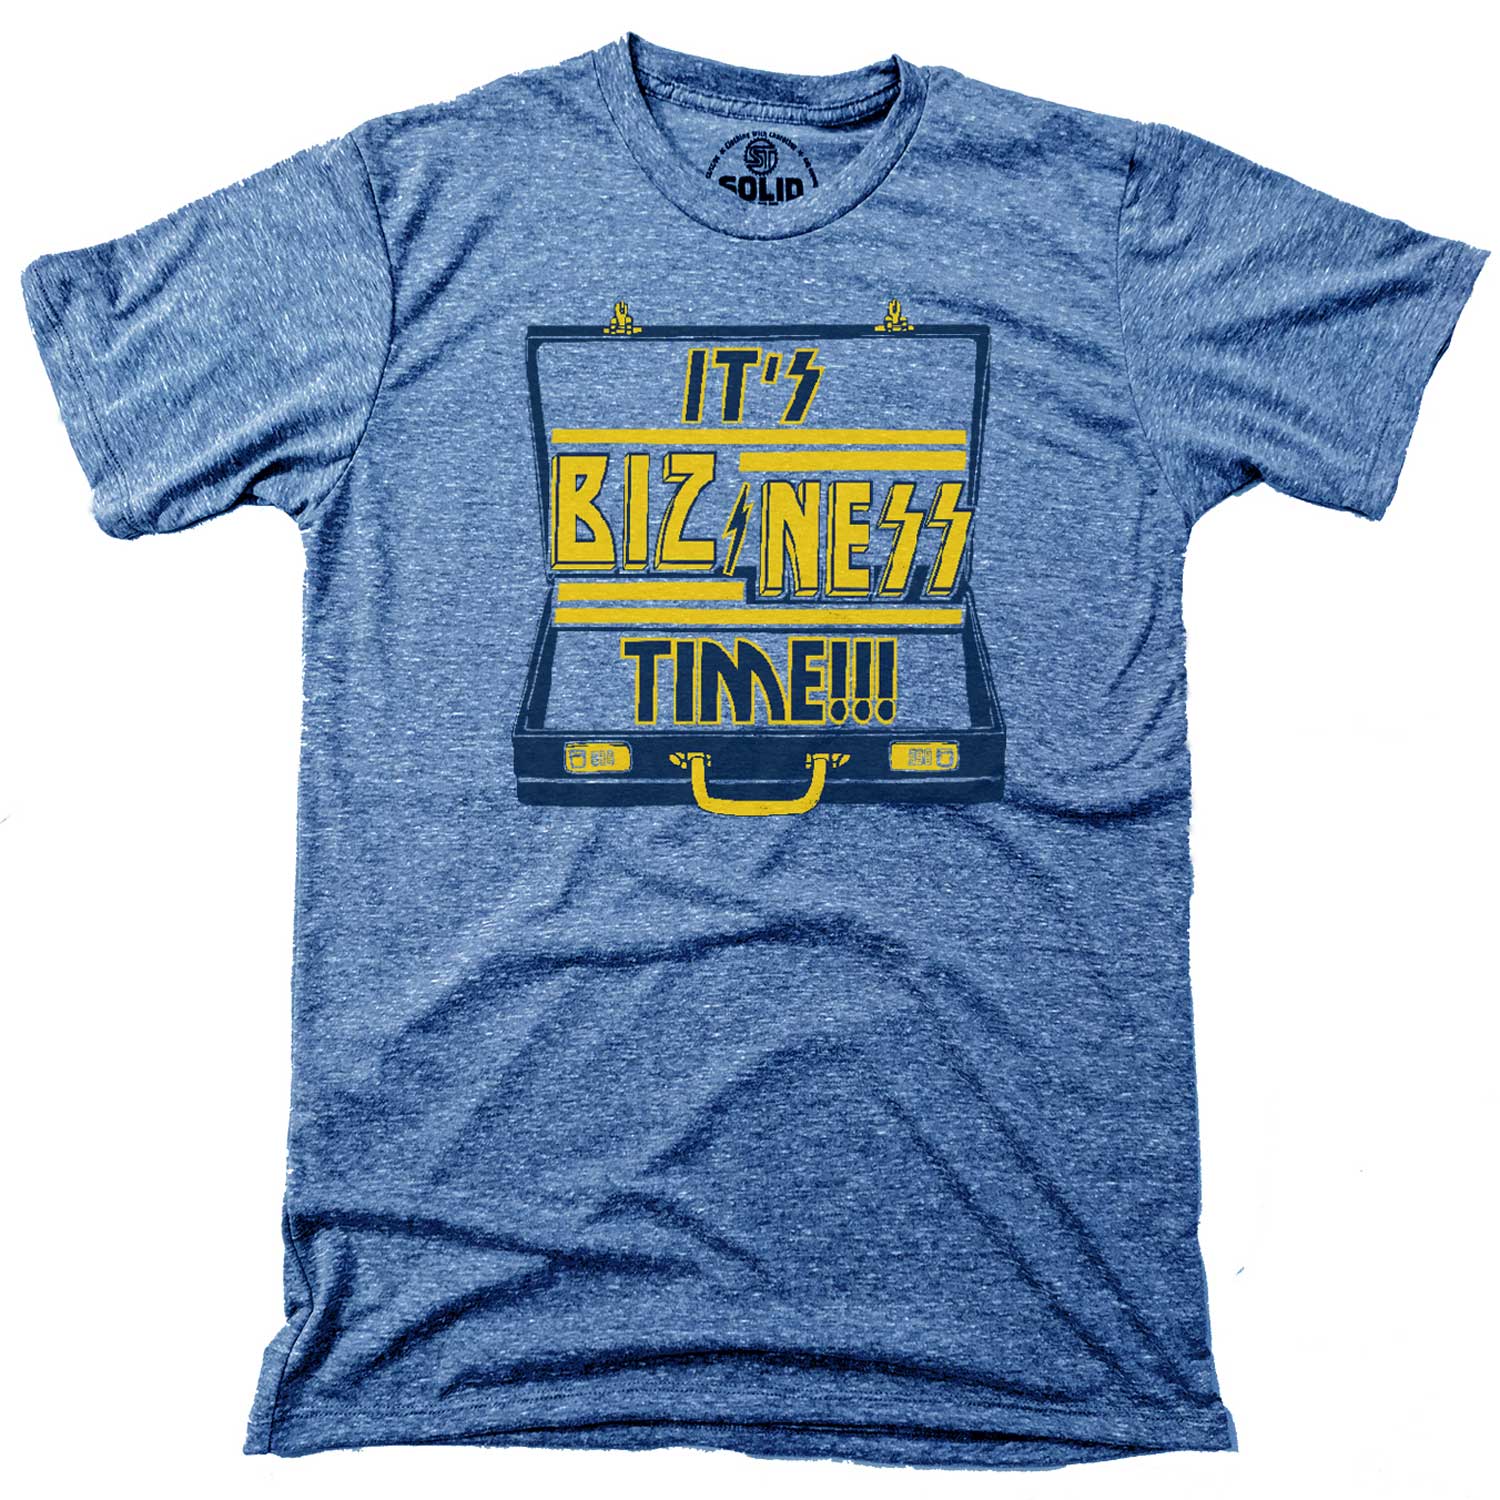 Men's It's Bizness TIme Vintage Inspired T-shirt | Funny Graphic Tee On Model| Solid Threads